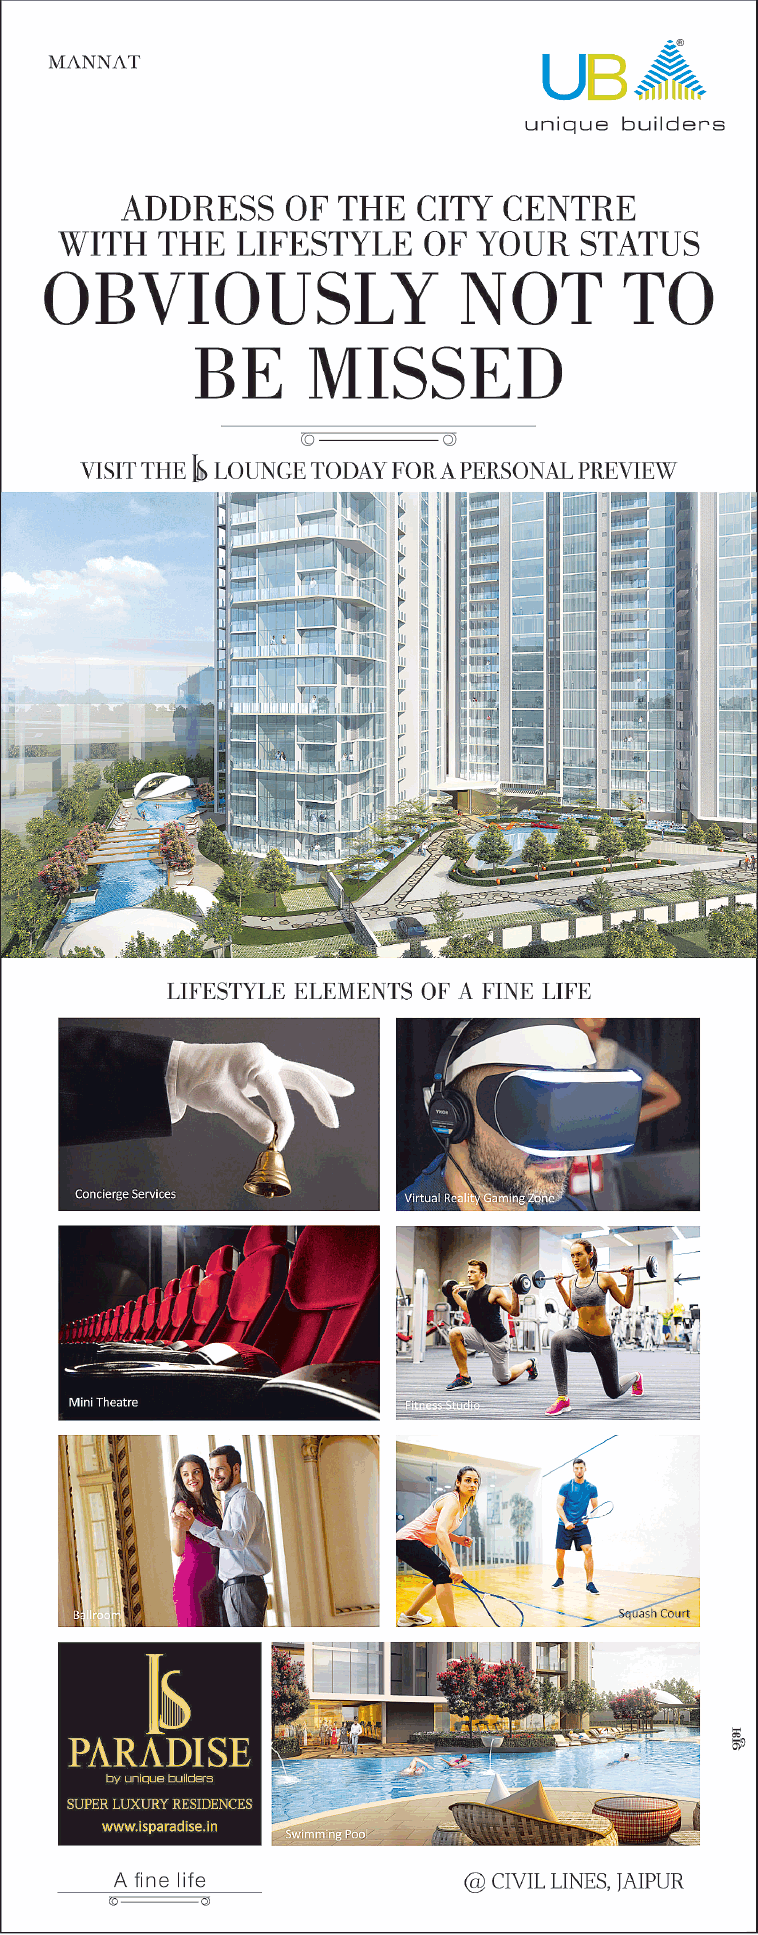 Unique Groups presents lifestyle elements of a fine life at IS Paradise in Jaipur